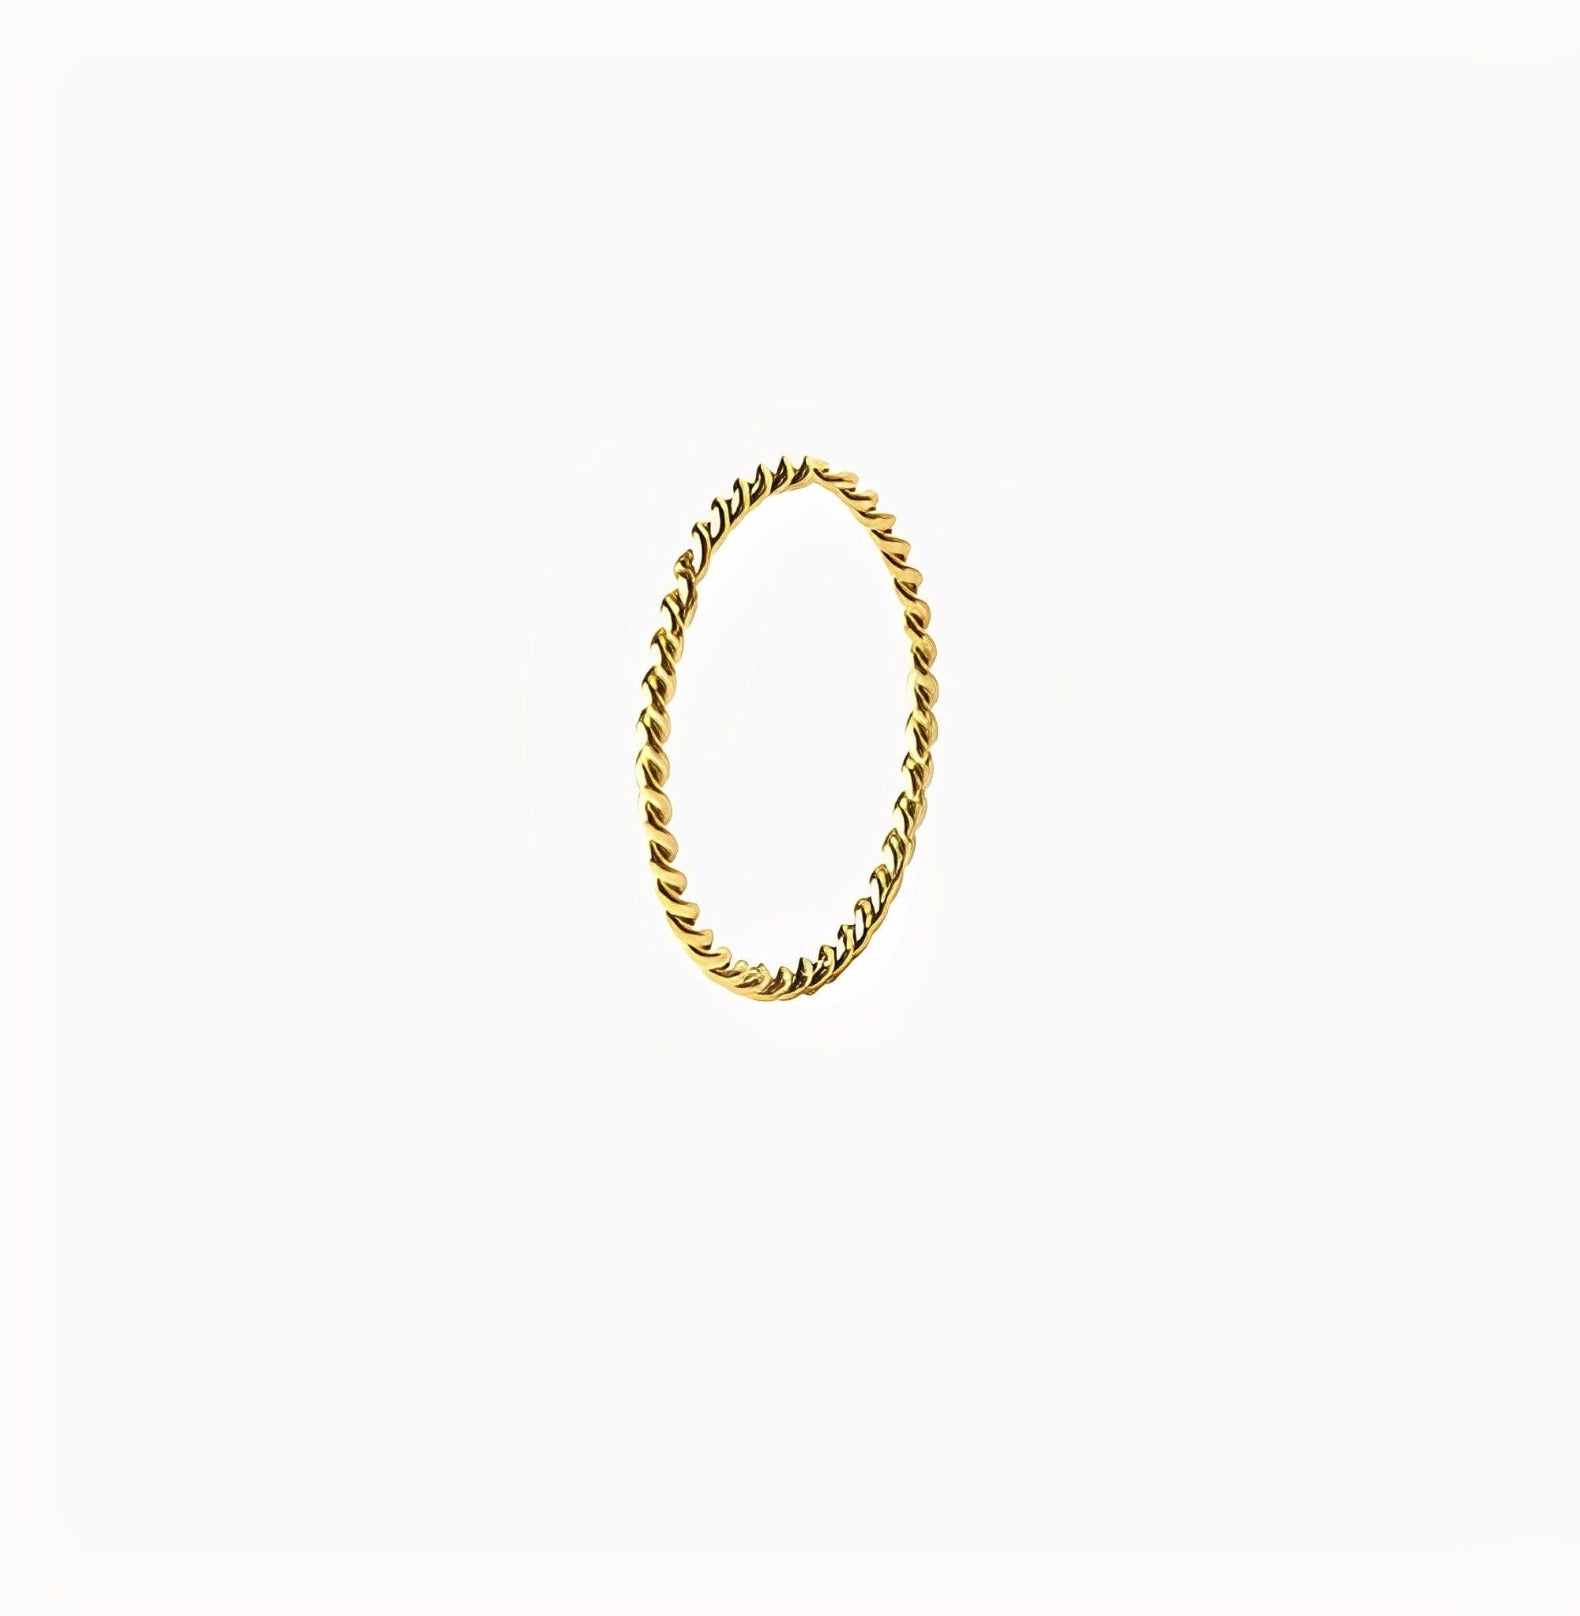 FLUX STACKING RING - GOLD ring Yubama Jewelry Online Store - The Elegant Designs of Gold and Silver ! Gold No4 